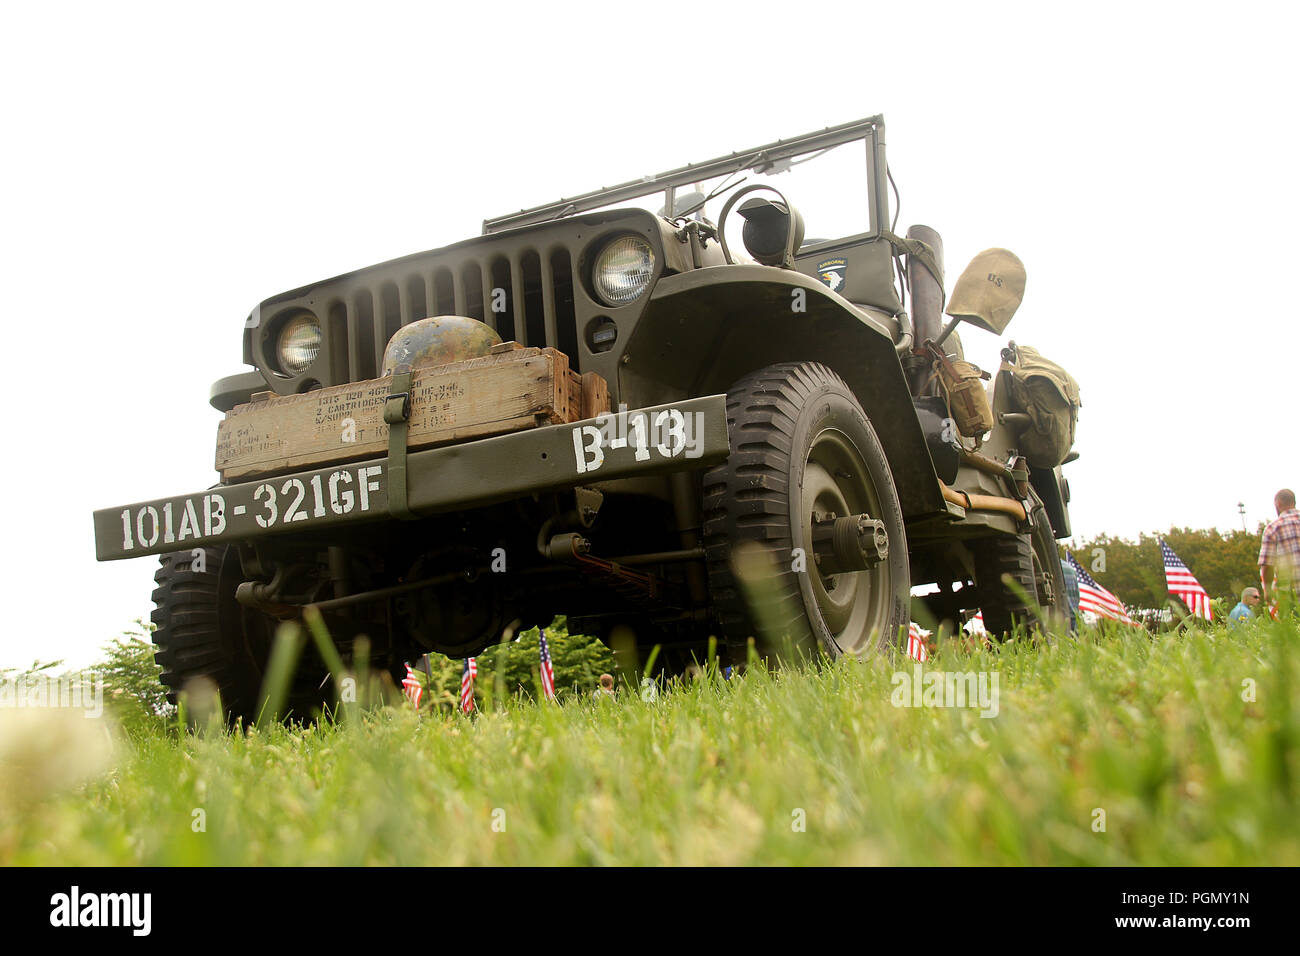 A Willys MB Army Jeep displayed during commemorating event of World War II at National D-Day Memorial, Virginia, USA Stock Photo